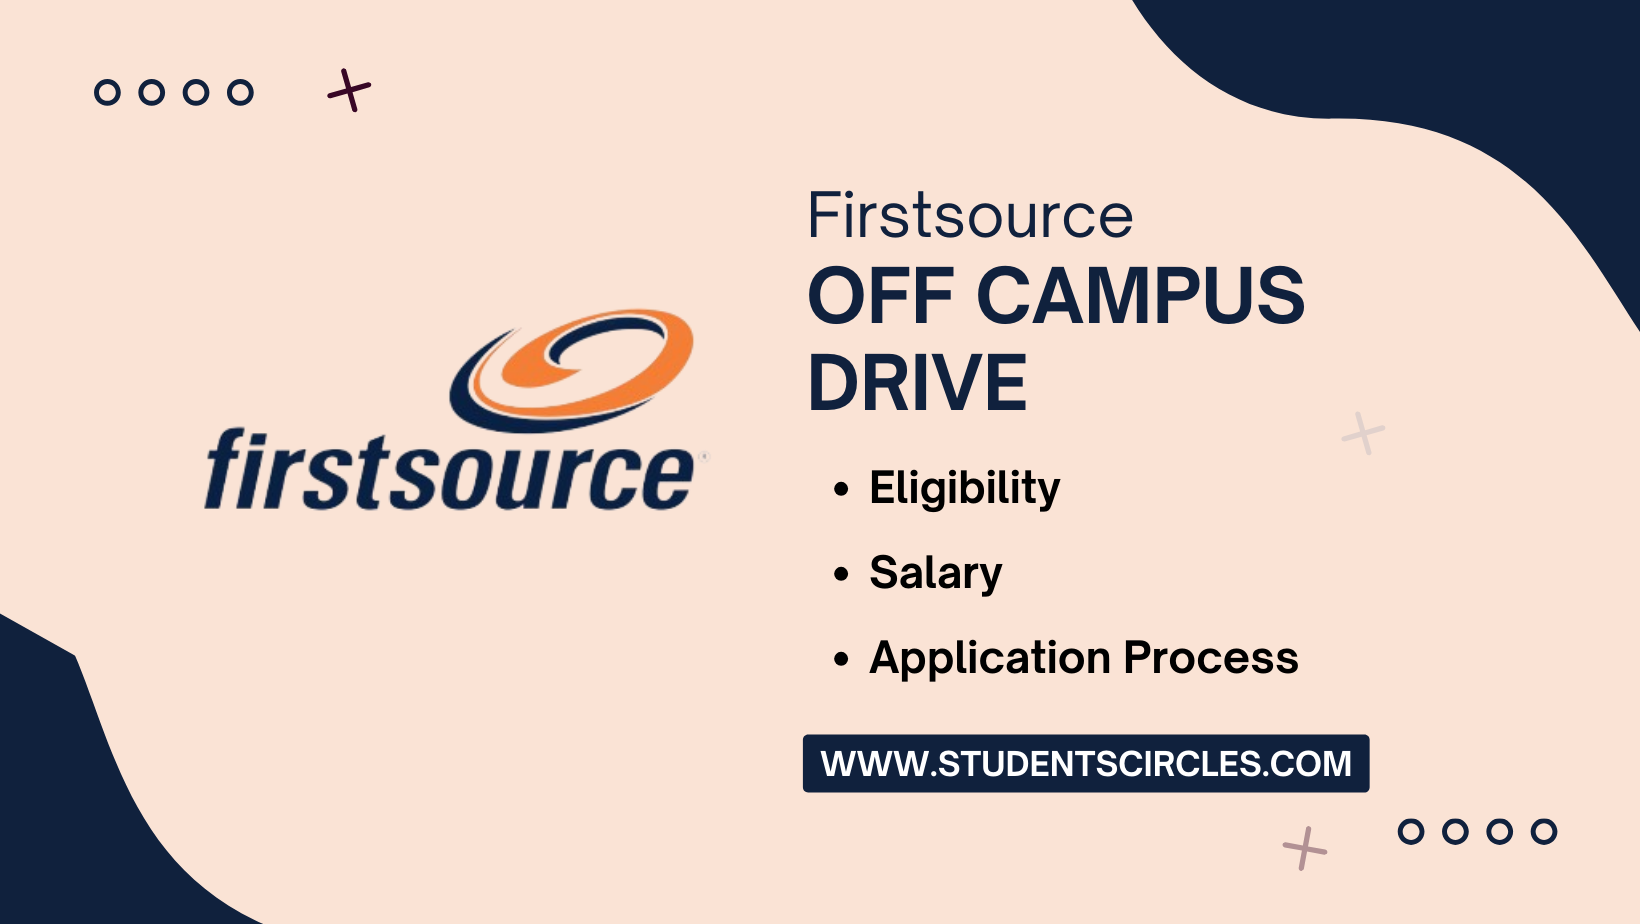 Firstsource Off Campus Drive